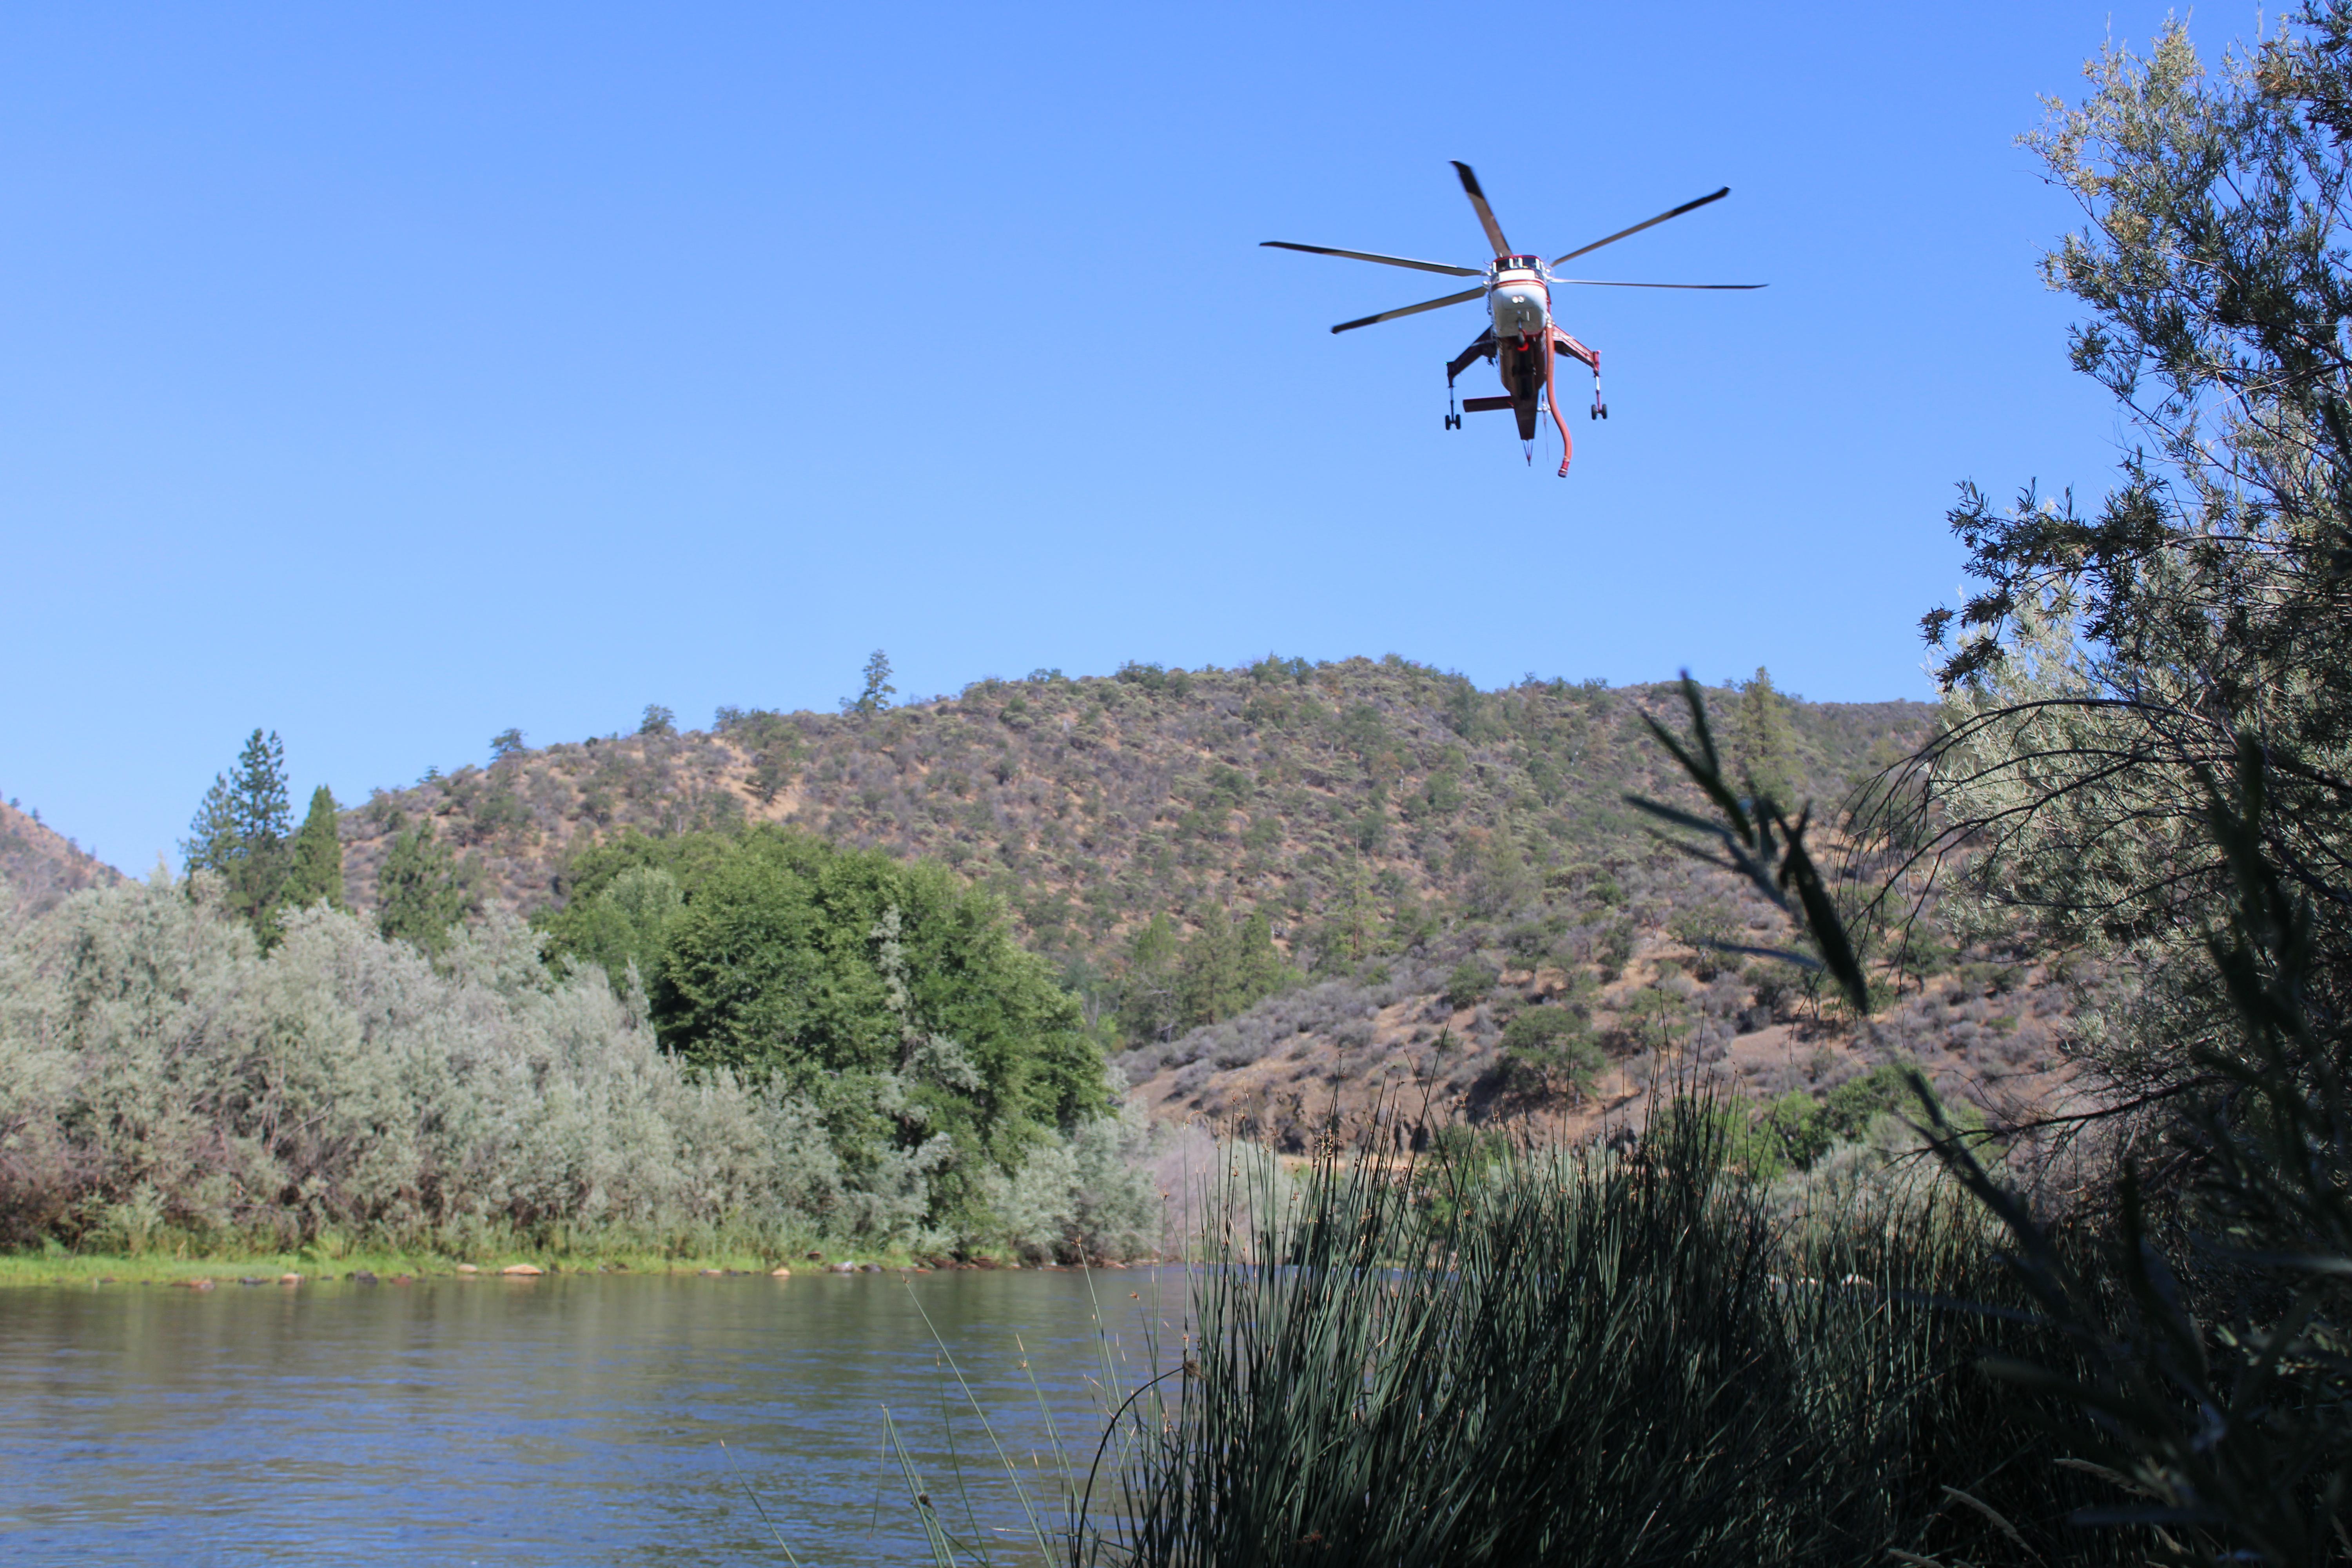 Helicopter transport Service helicopter 6HT dipping snorkel in Klamath River to fill with water 